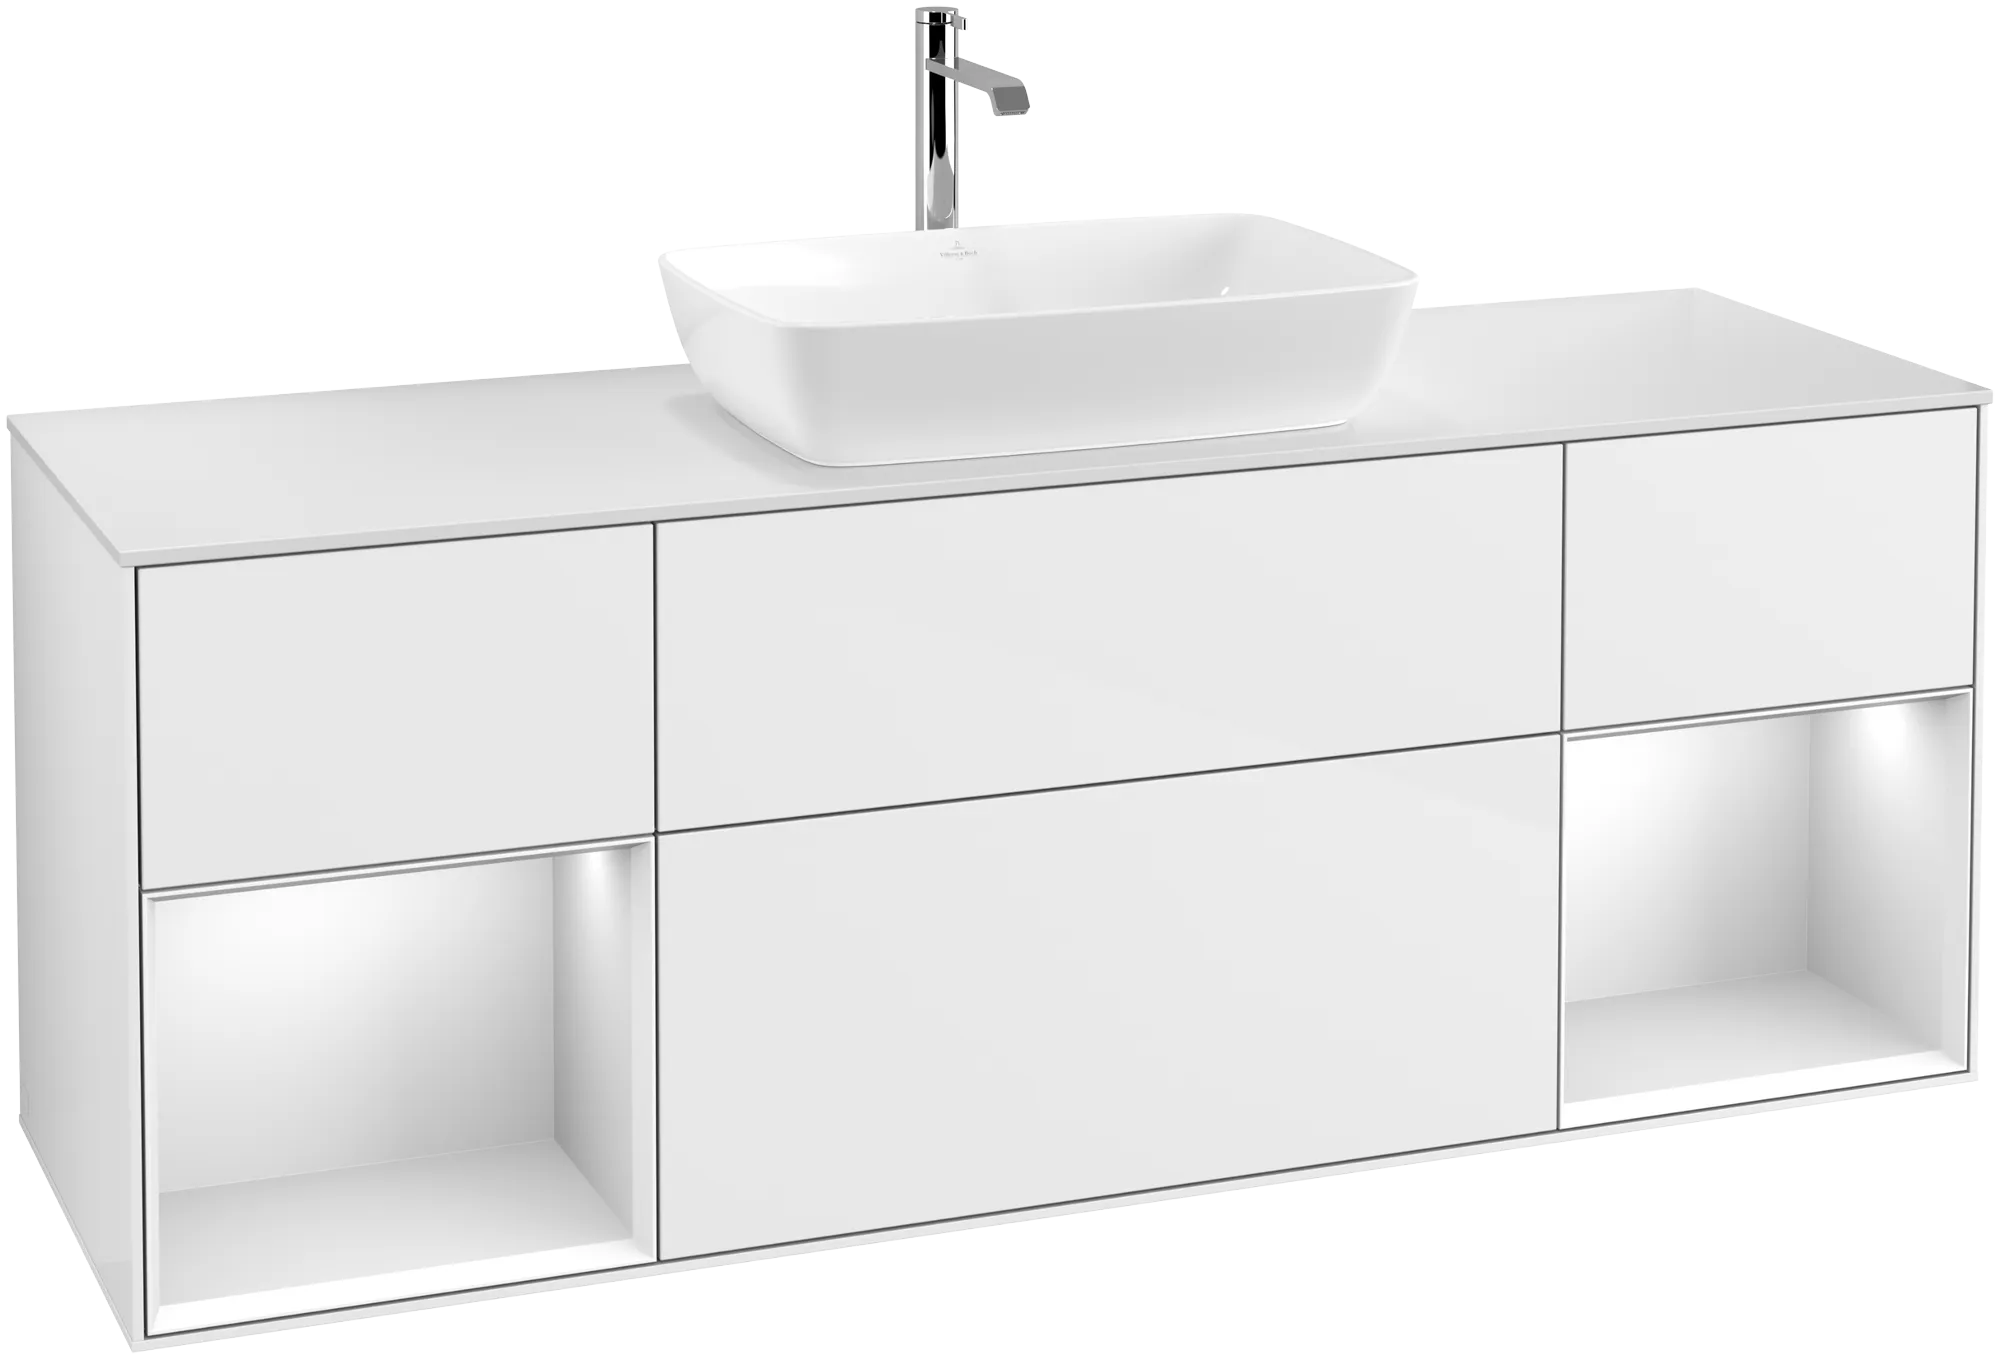 Obrázek VILLEROY BOCH Finion Vanity unit, with lighting, 4 pull-out compartments, 1600 x 603 x 501 mm, Glossy White Lacquer / White Matt Lacquer / Glass White Matt #G861MTGF